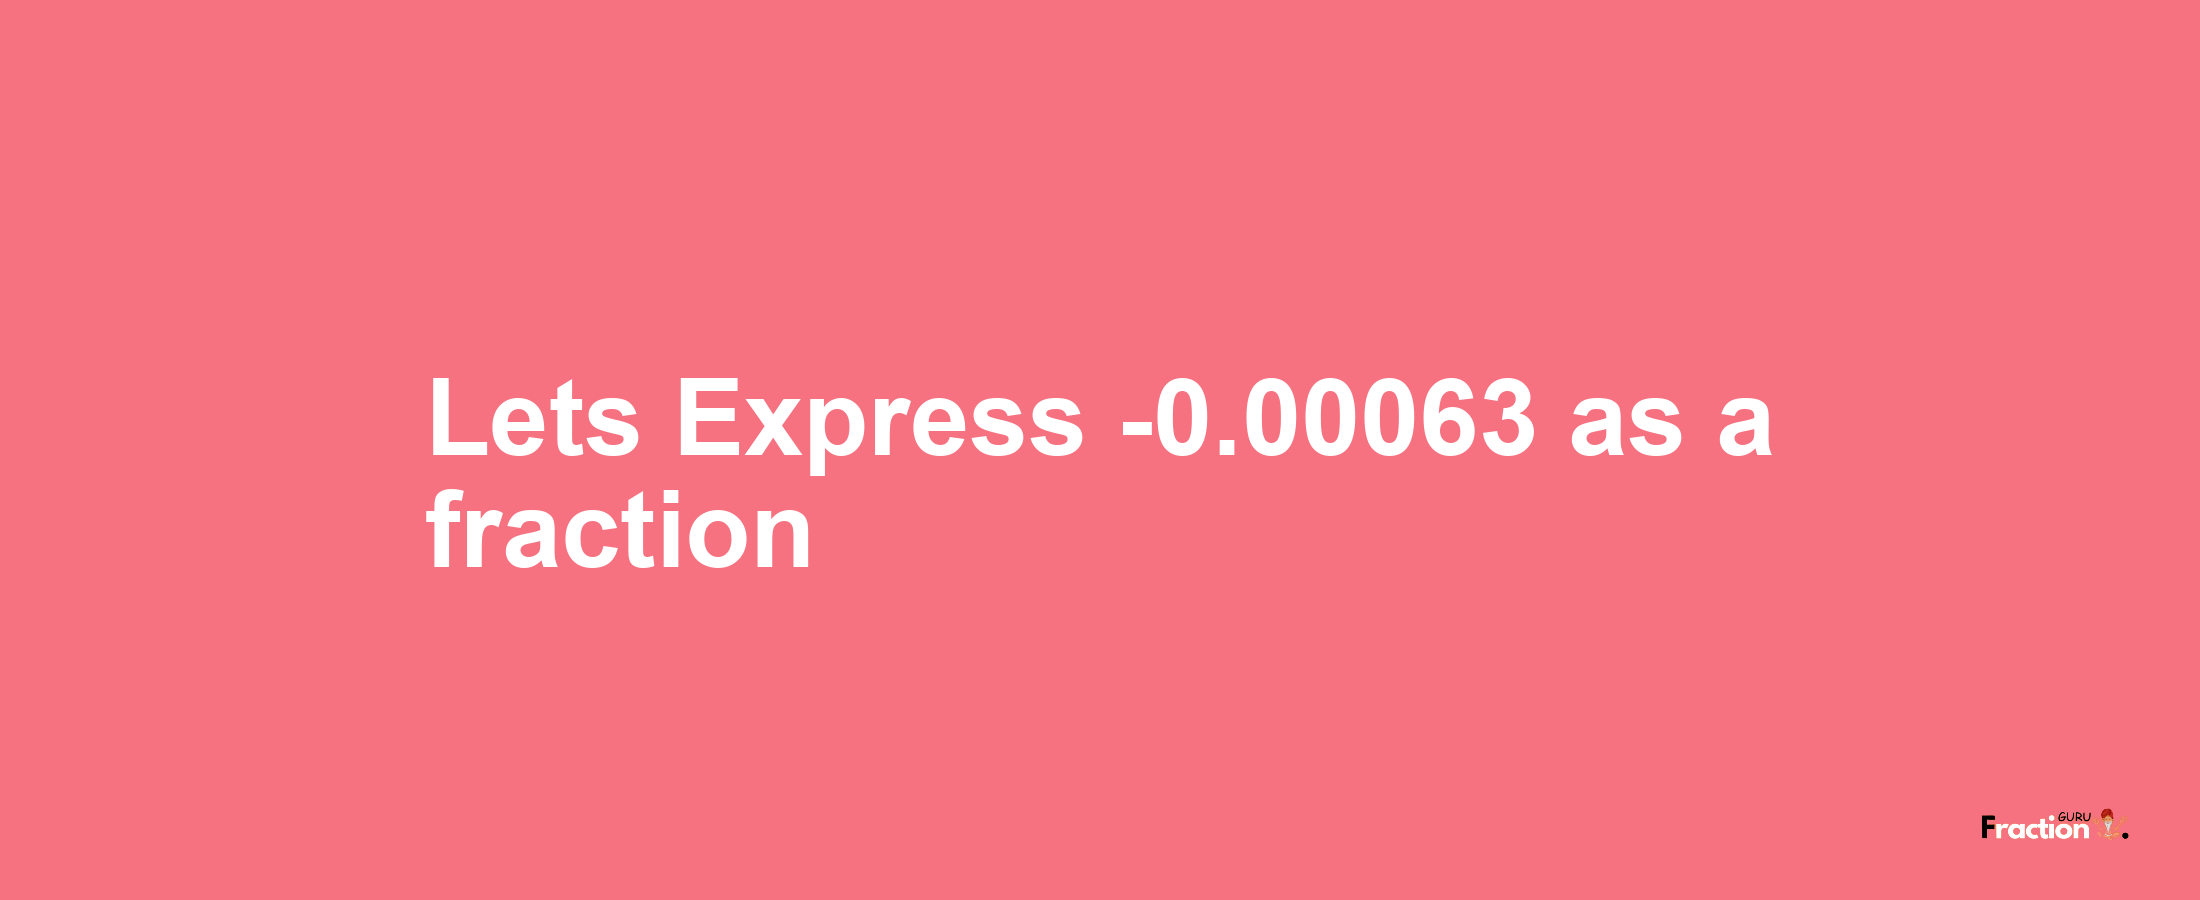 Lets Express -0.00063 as afraction